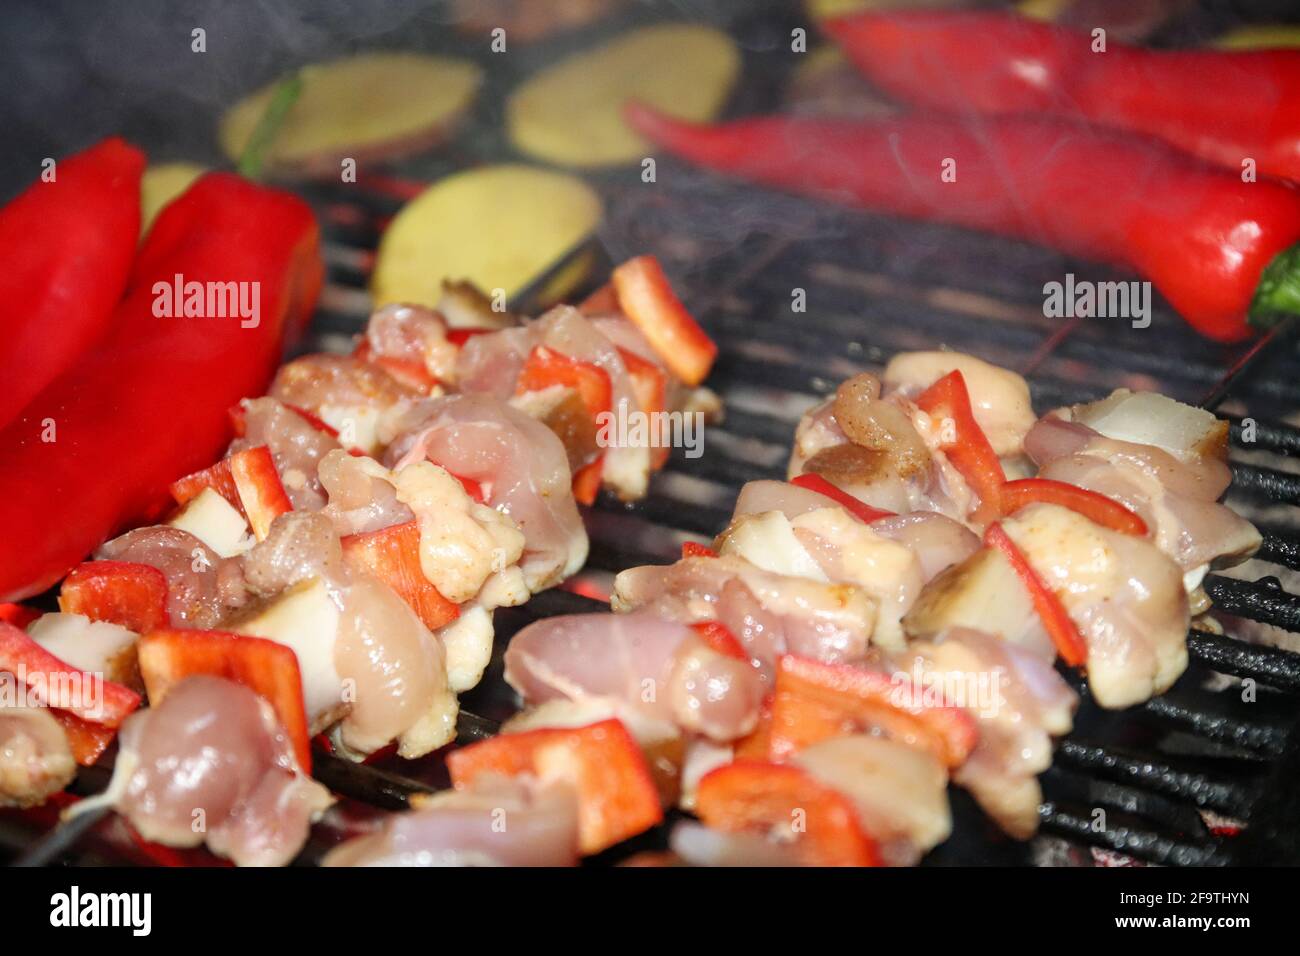 Grilled chicken skewers with fresh vegetables. Stock Photo